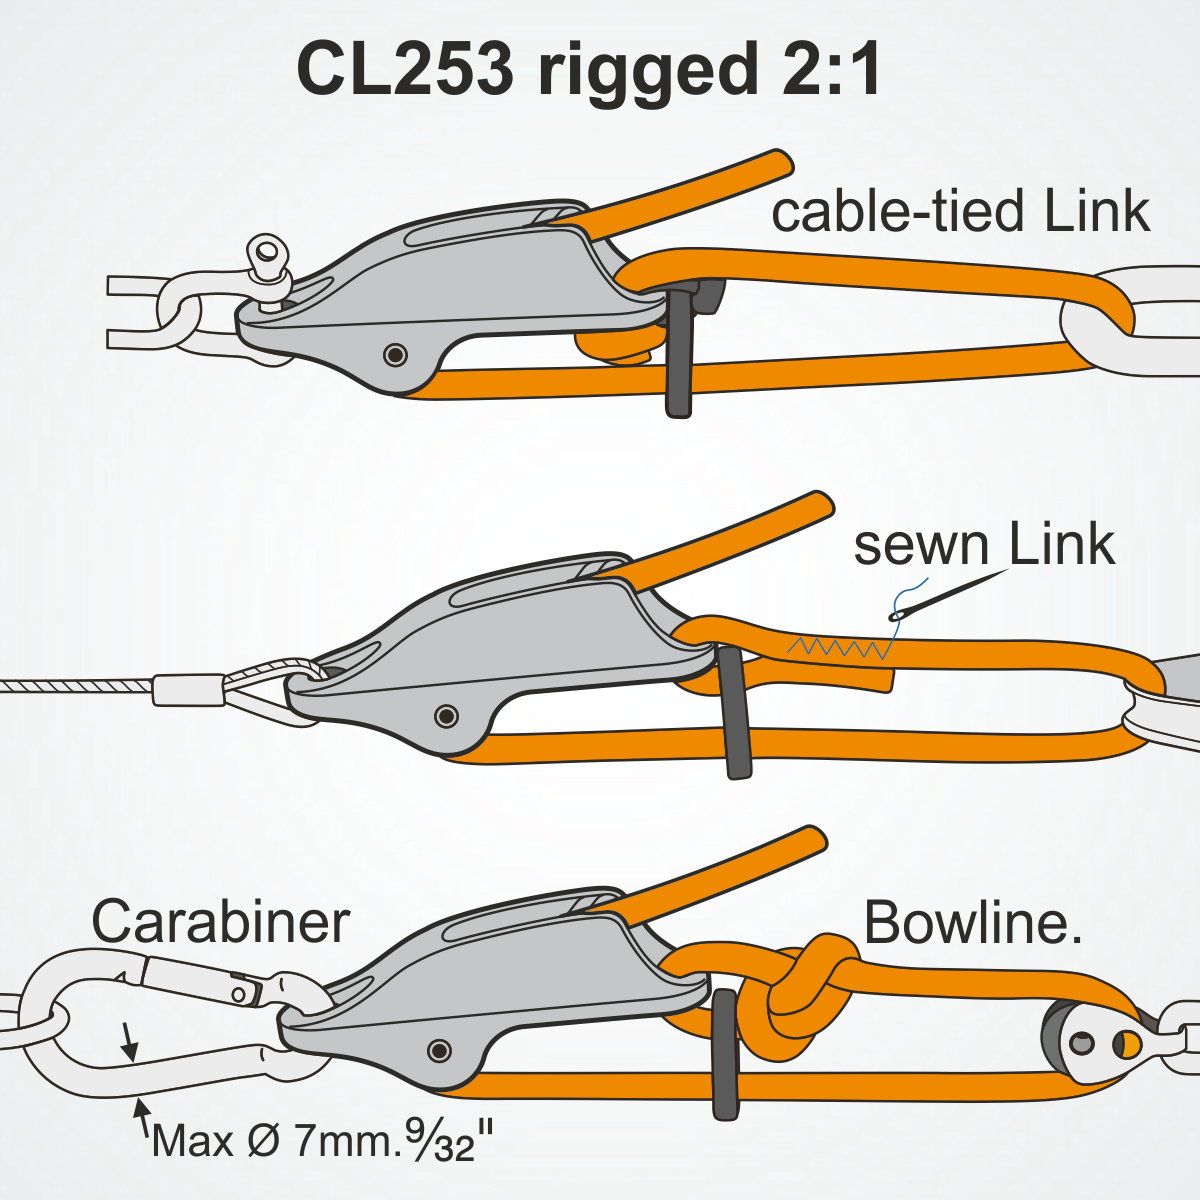 Clamcleat Trapeze & Vang Cleat